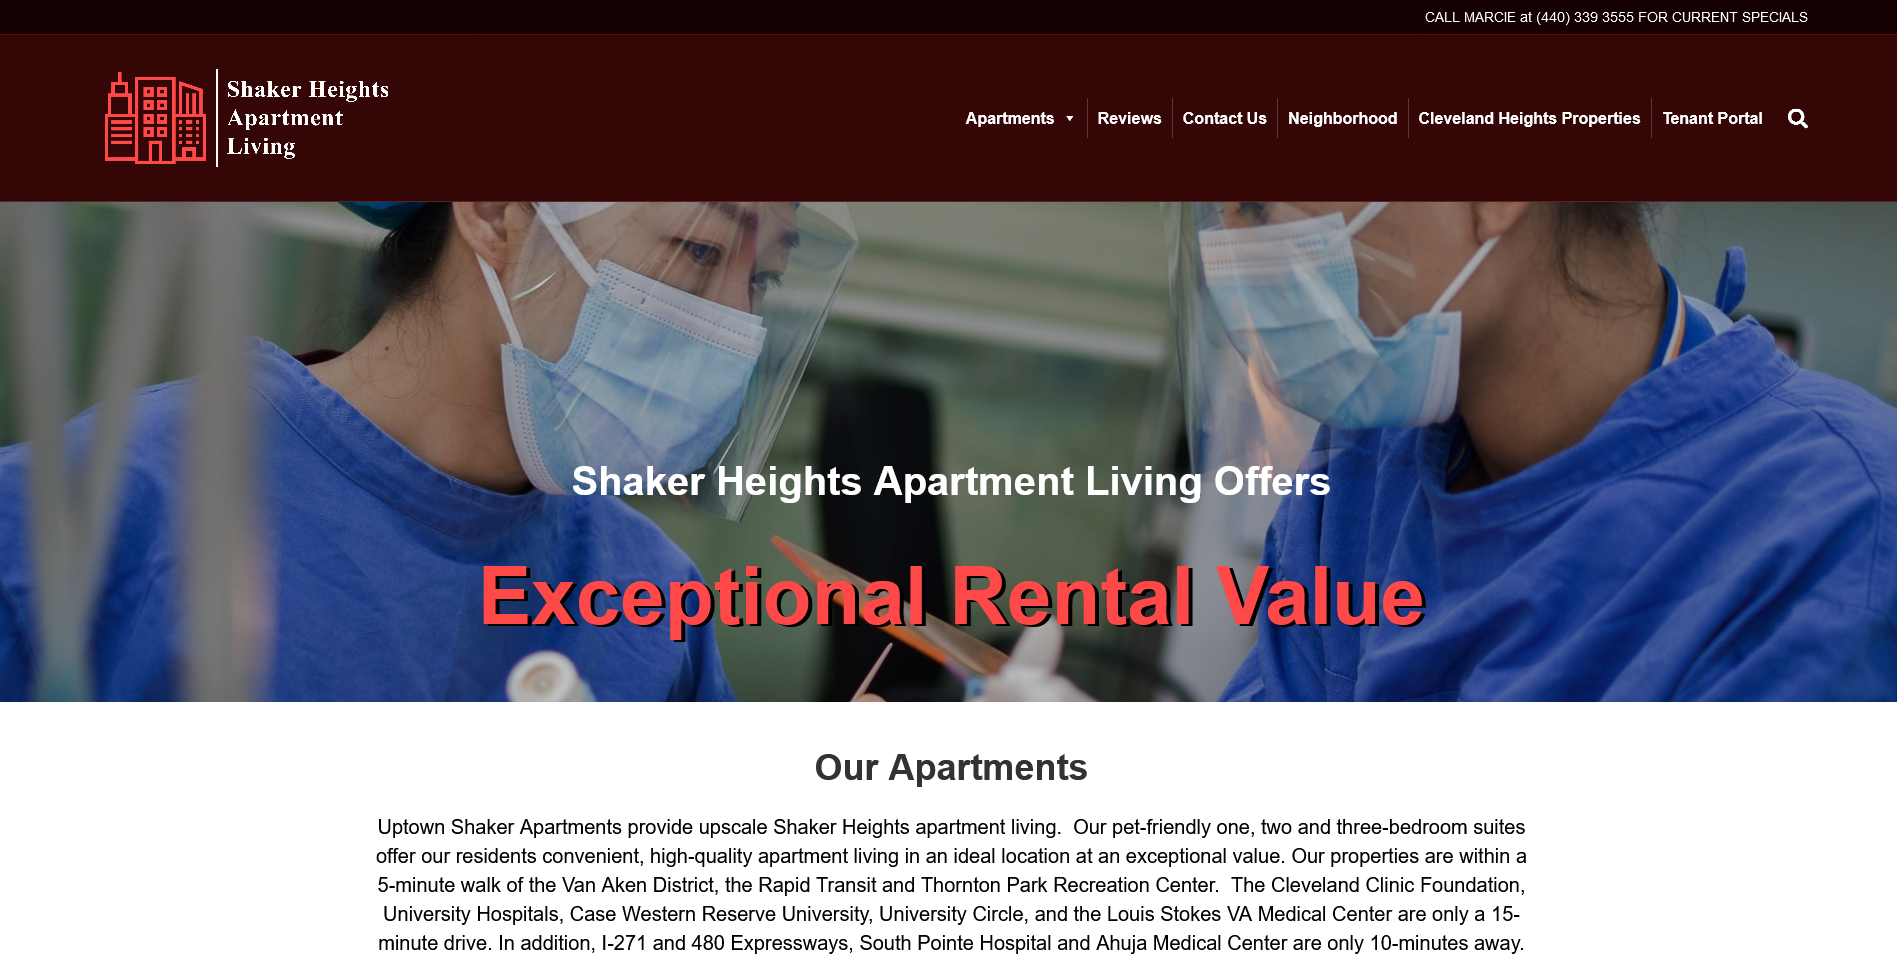 Shaker Heights Apartment Living